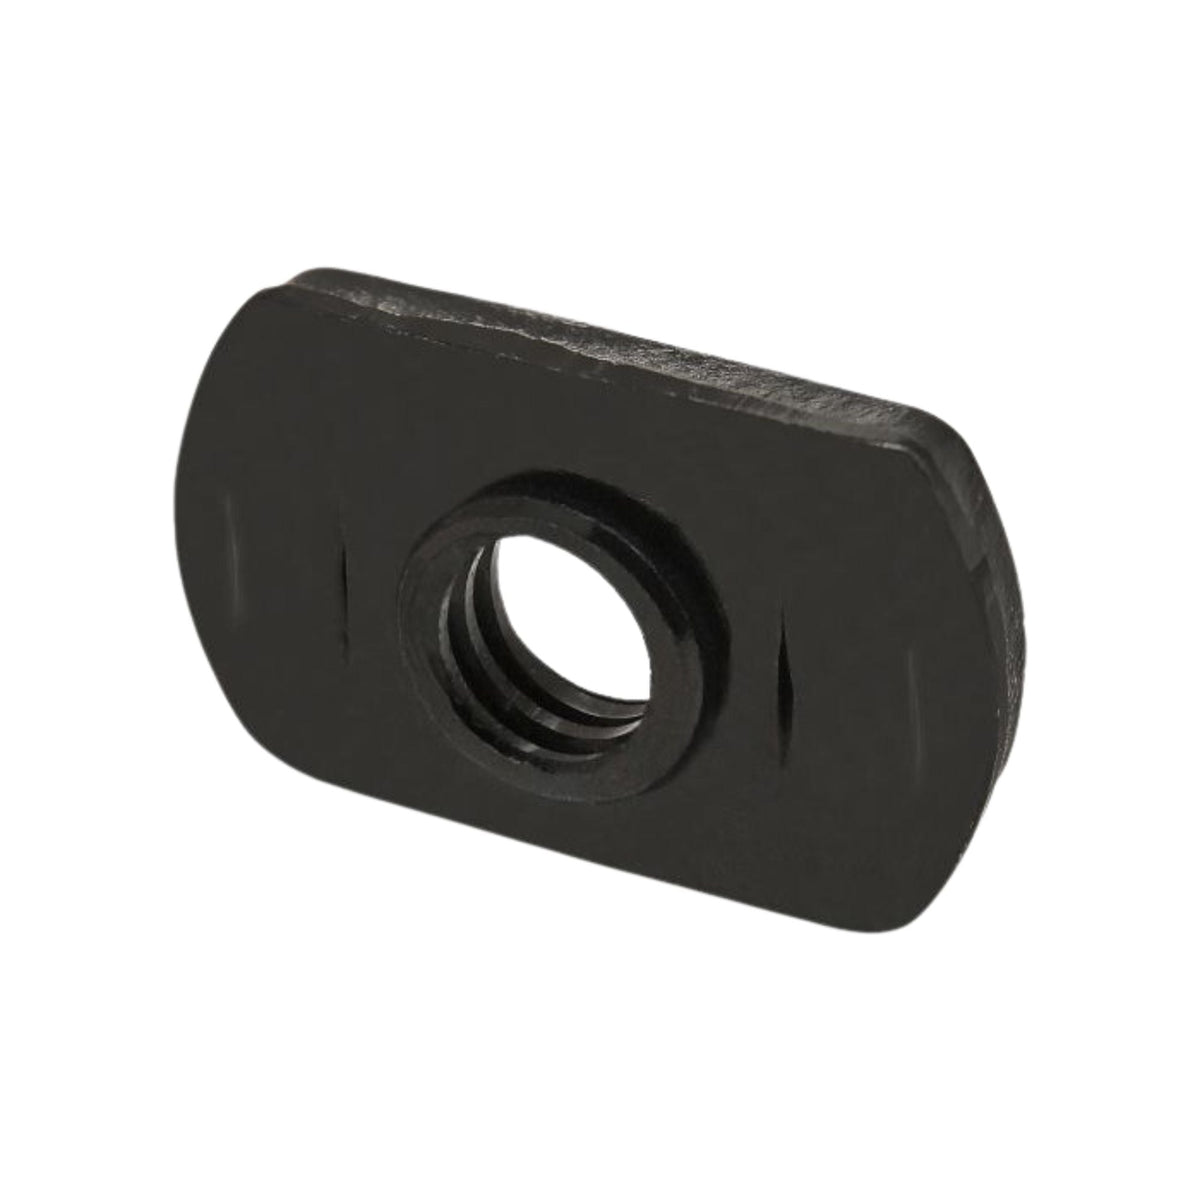 side view of a black, rectangular t-nut with rounded ends and a threaded hole in the center